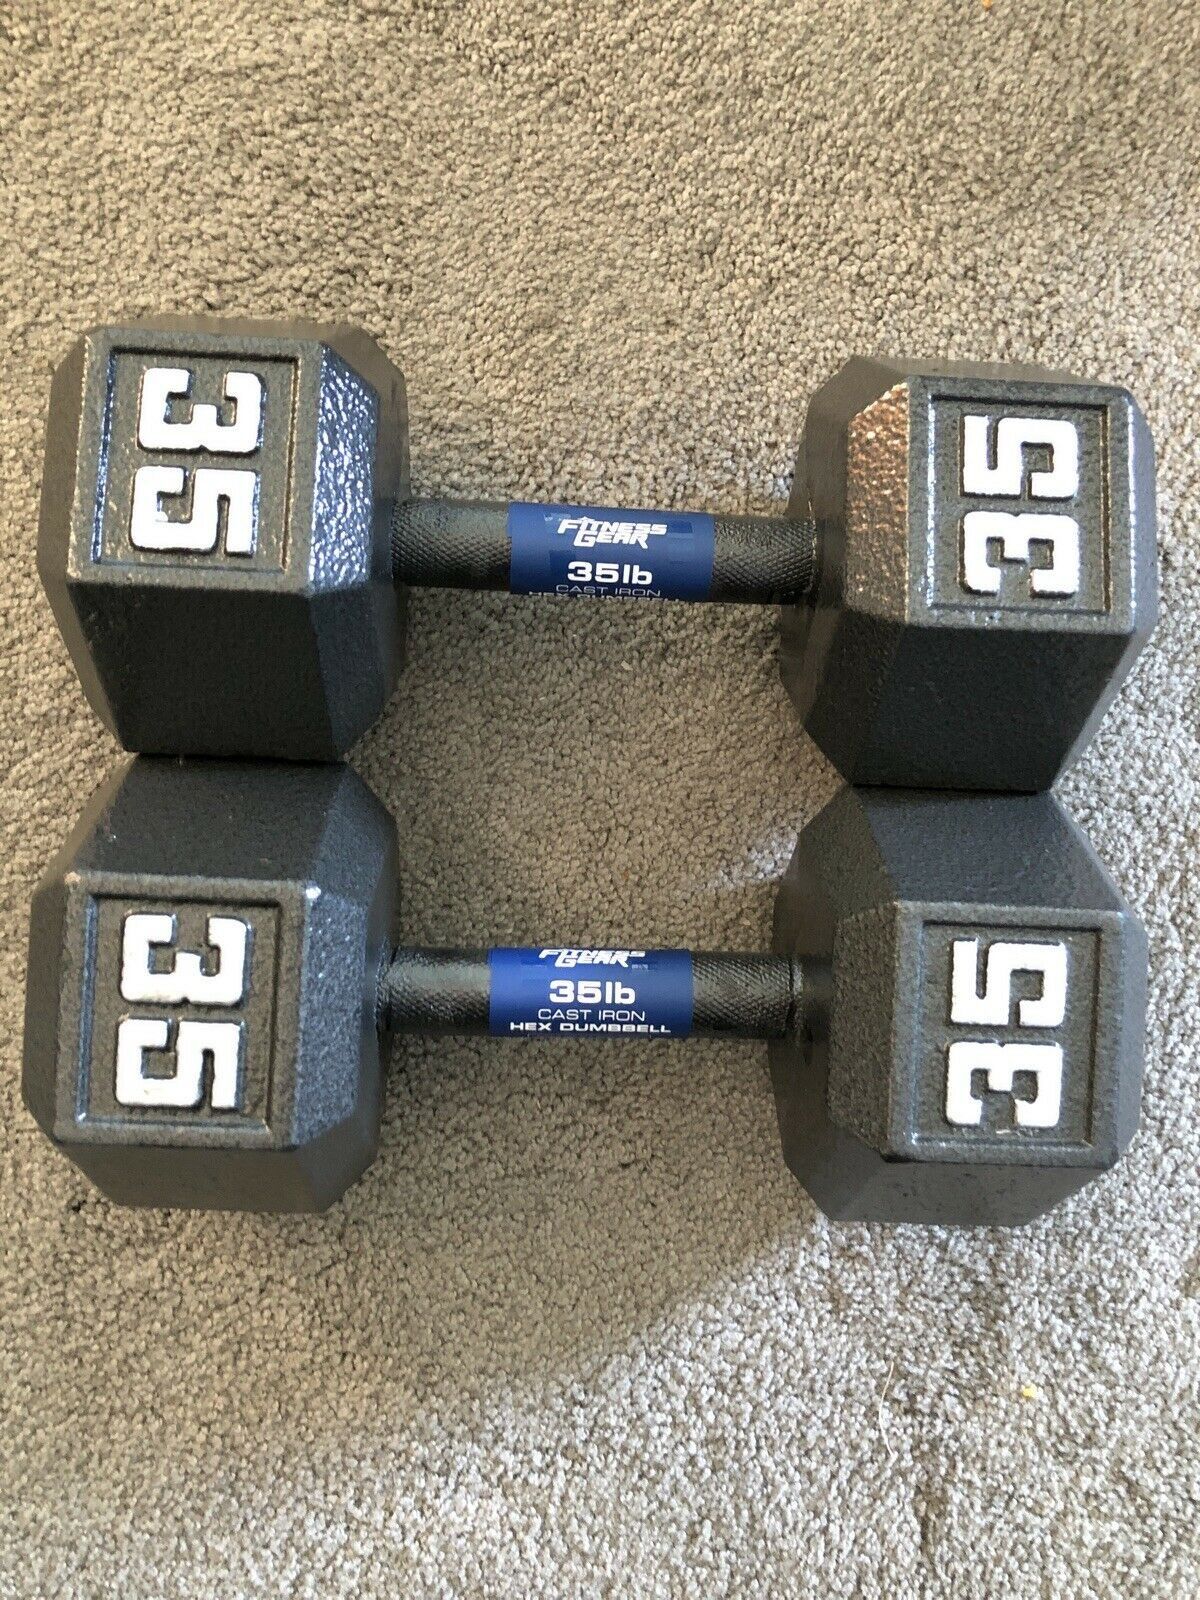 Fitness Gear Dumbells Set 35 lb Pound Pair (70 total lbs) Cast Iron